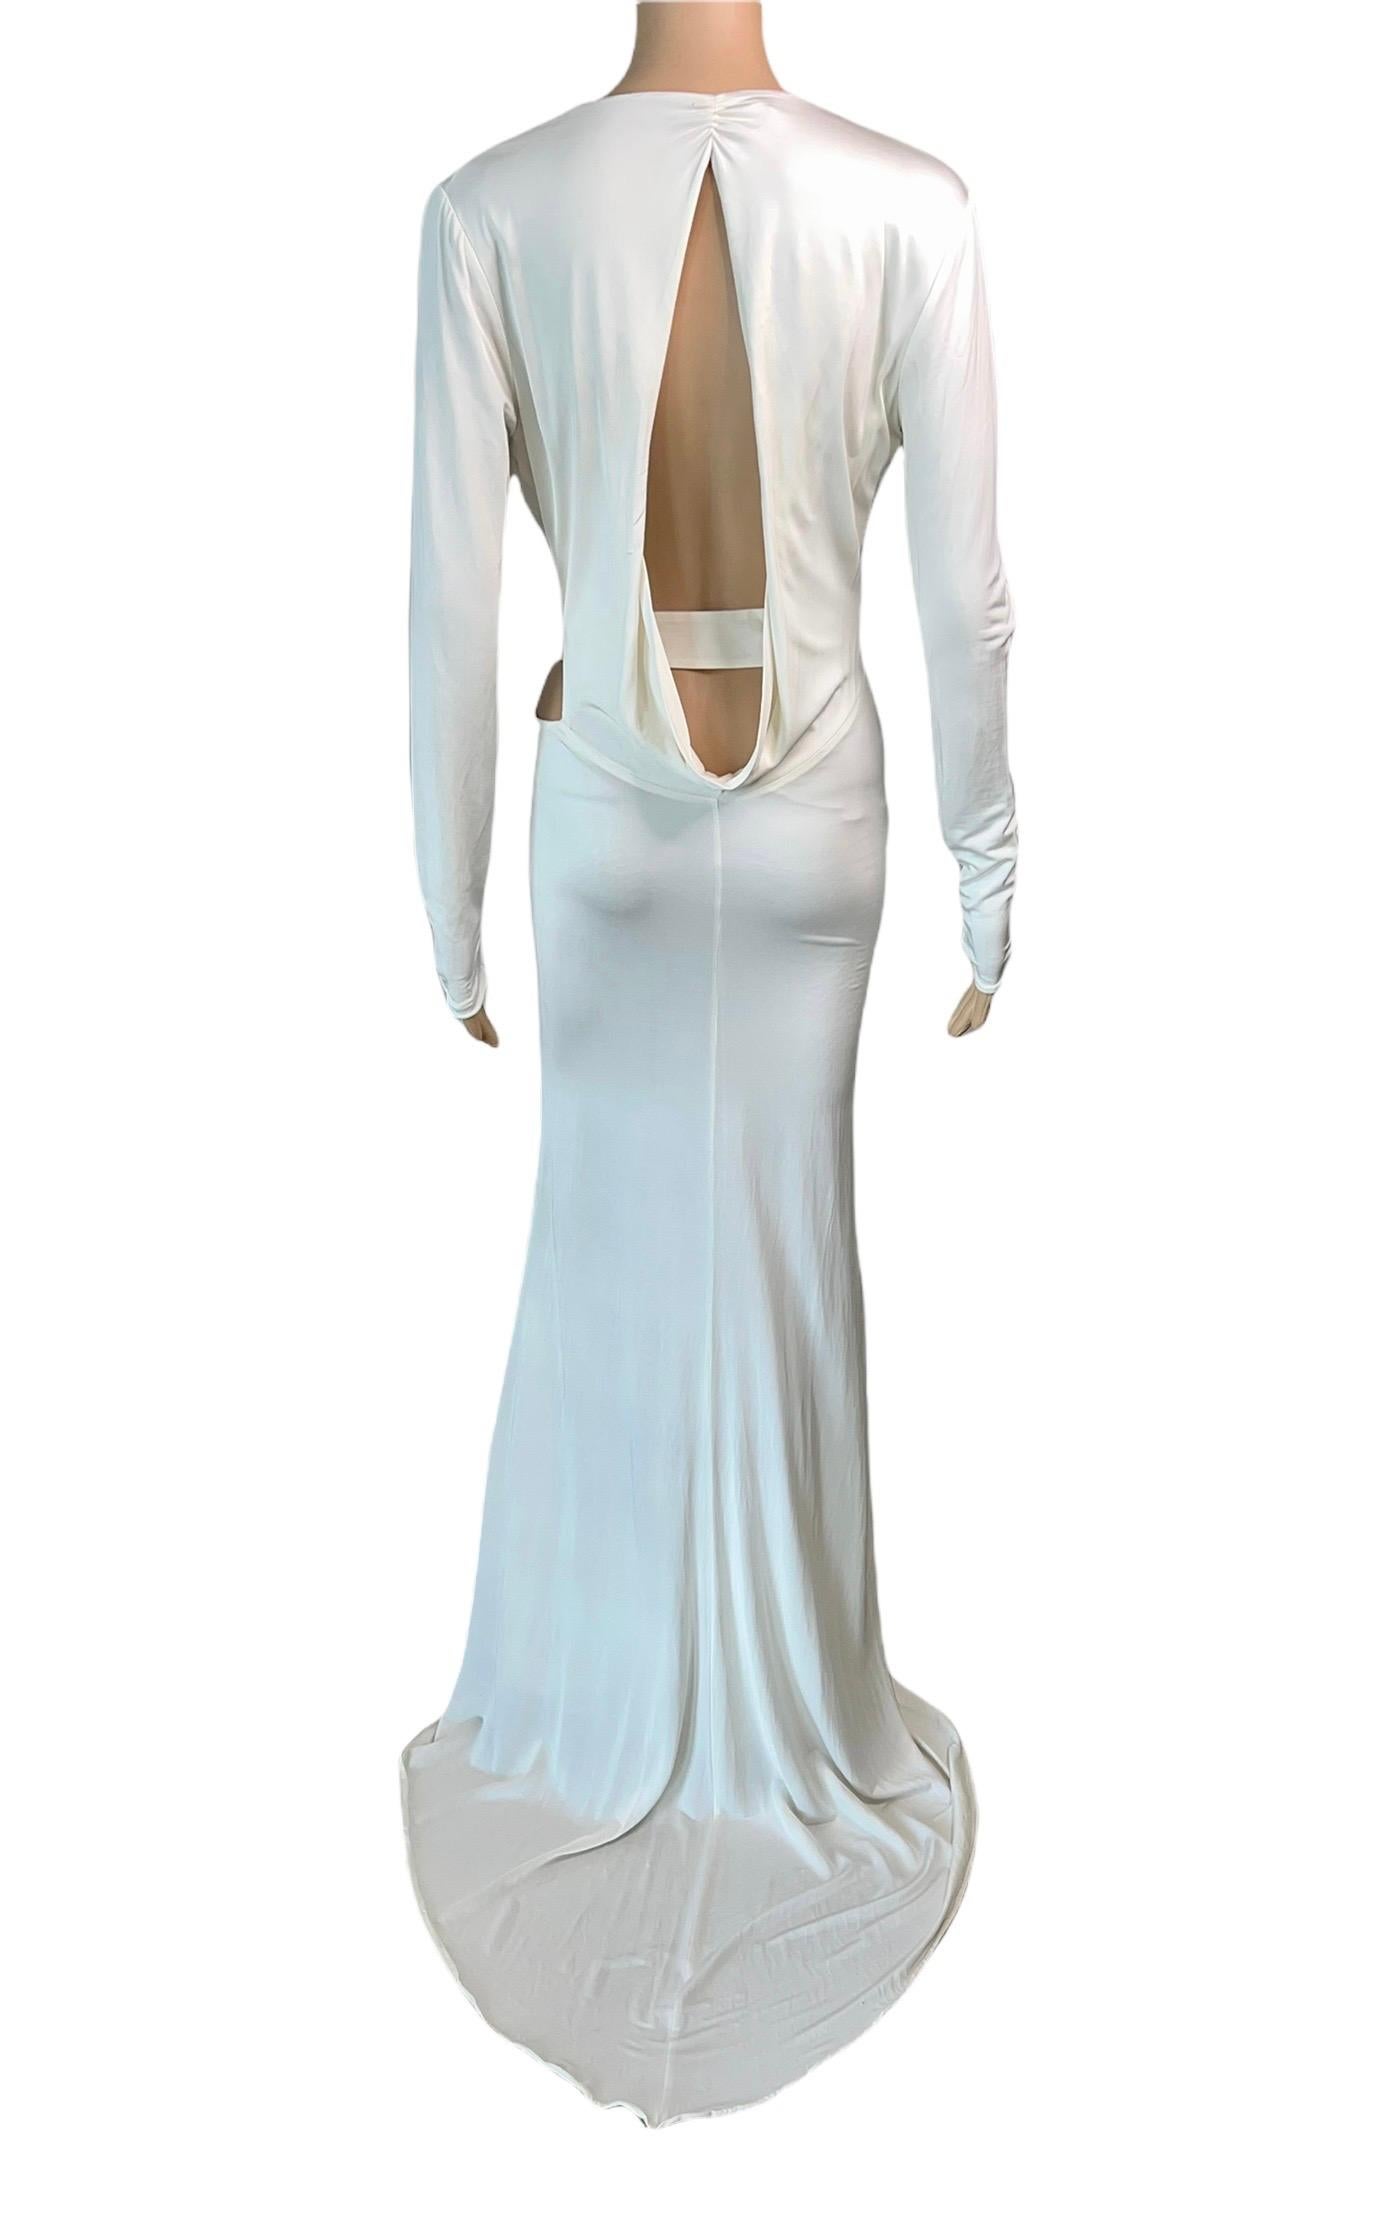 Gray Tom Ford for Gucci F/W 2004 Runway Plunging Cutout Ivory Evening Dress Gown For Sale